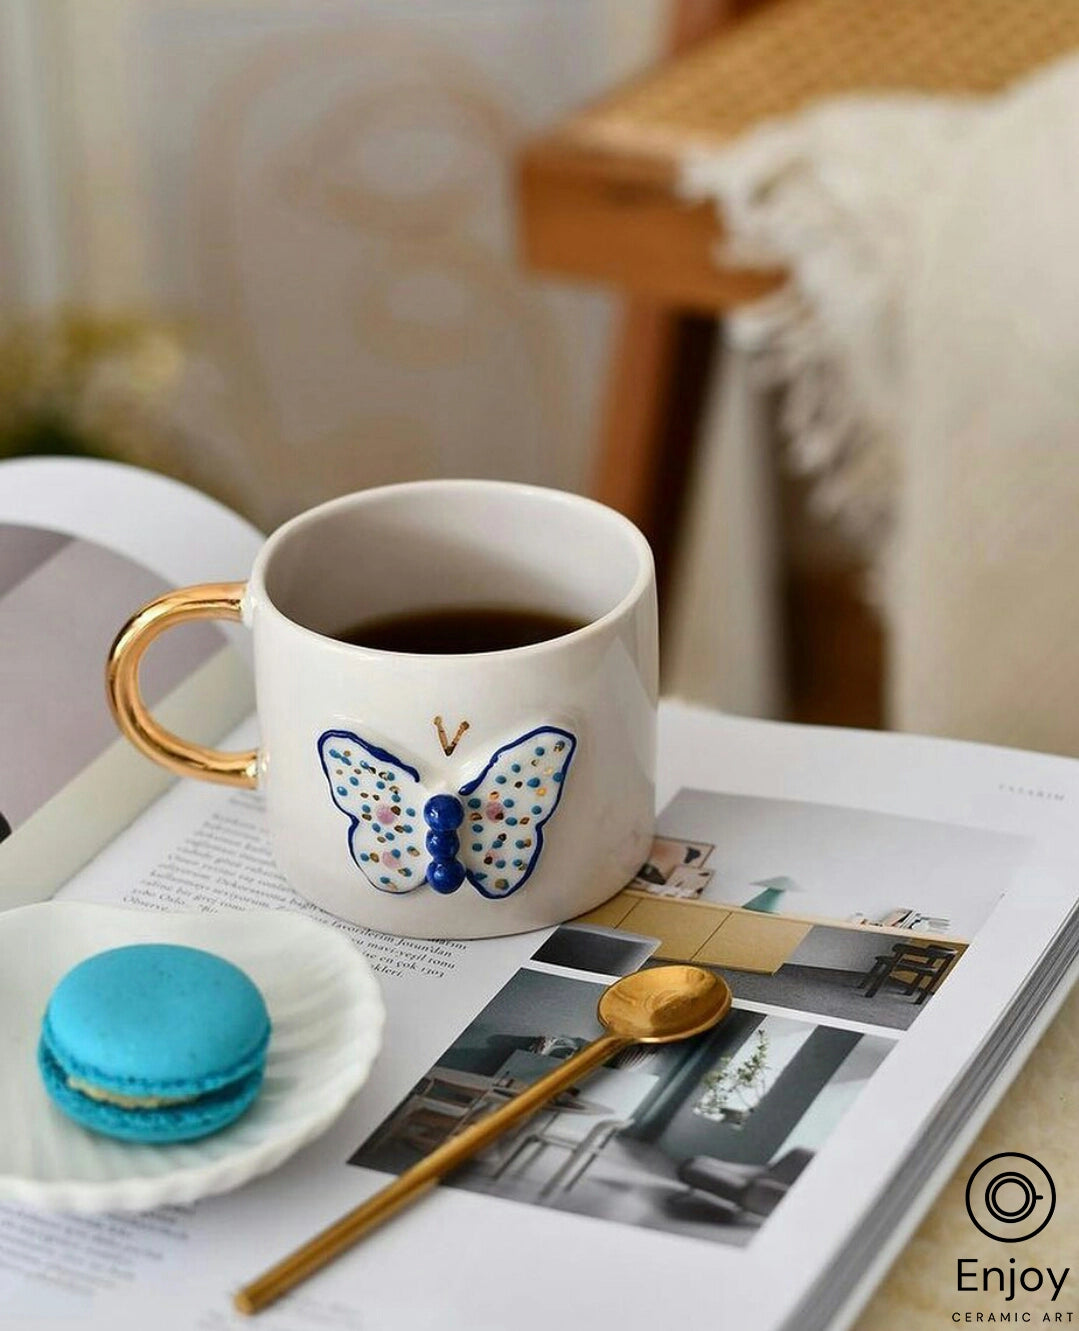 A white ceramic mug with a golden handle and a delicately painted butterfly motif, filled with dark liquid, stands on an open magazine featuring home decor. A single blue macaron and a golden spoon rest beside the mug, set against a cozy room backdrop with warm lighting